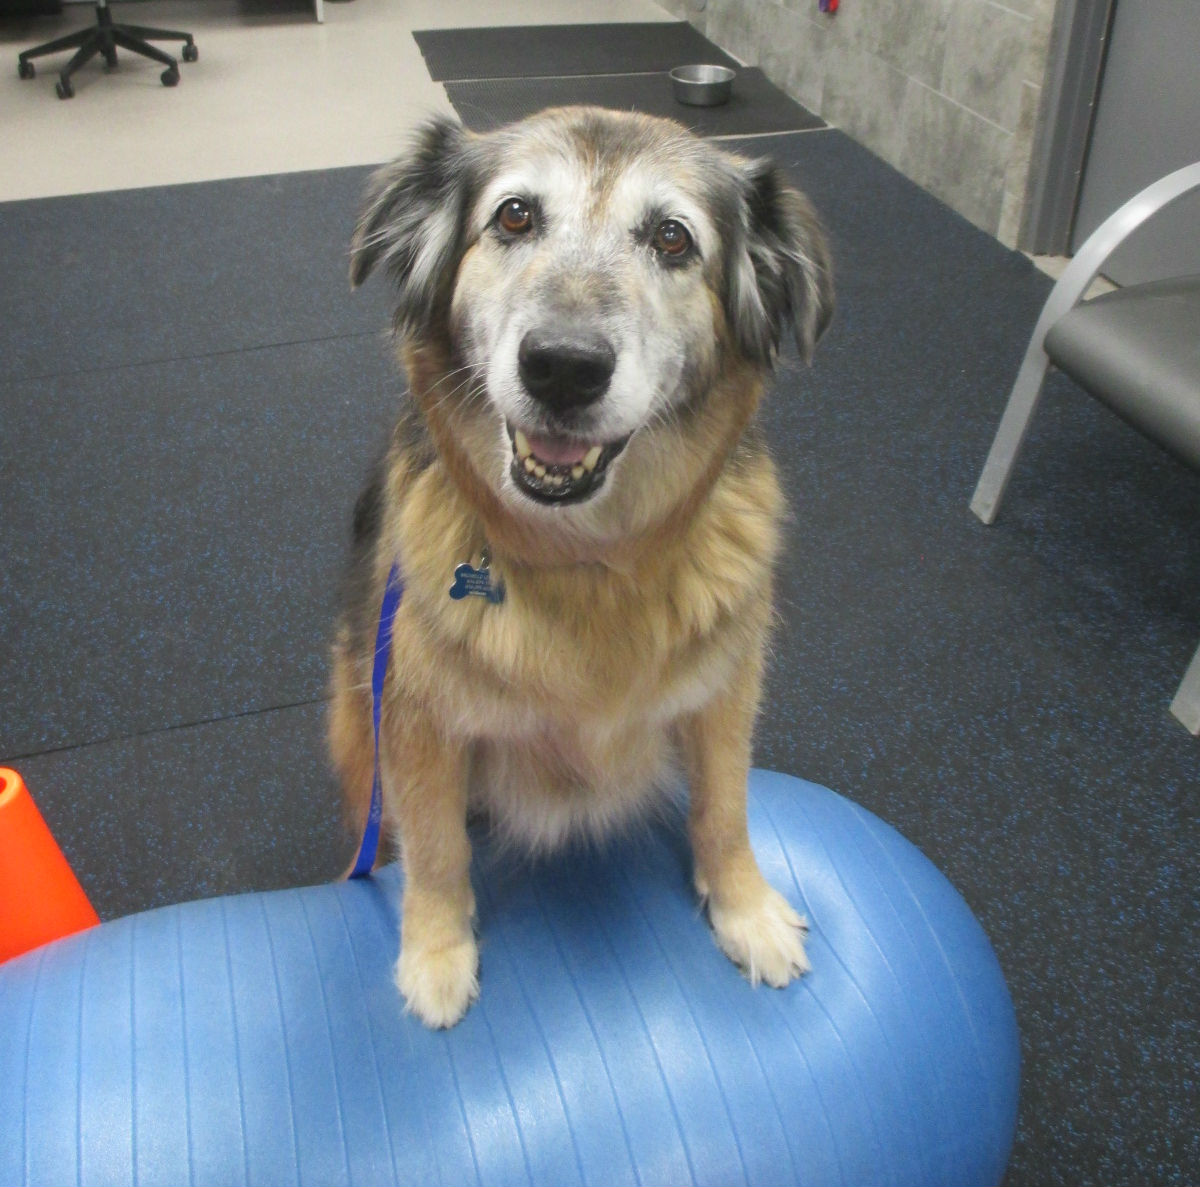 CHFA's rehab gives senior dogs a new &quot;leash&quot; on life